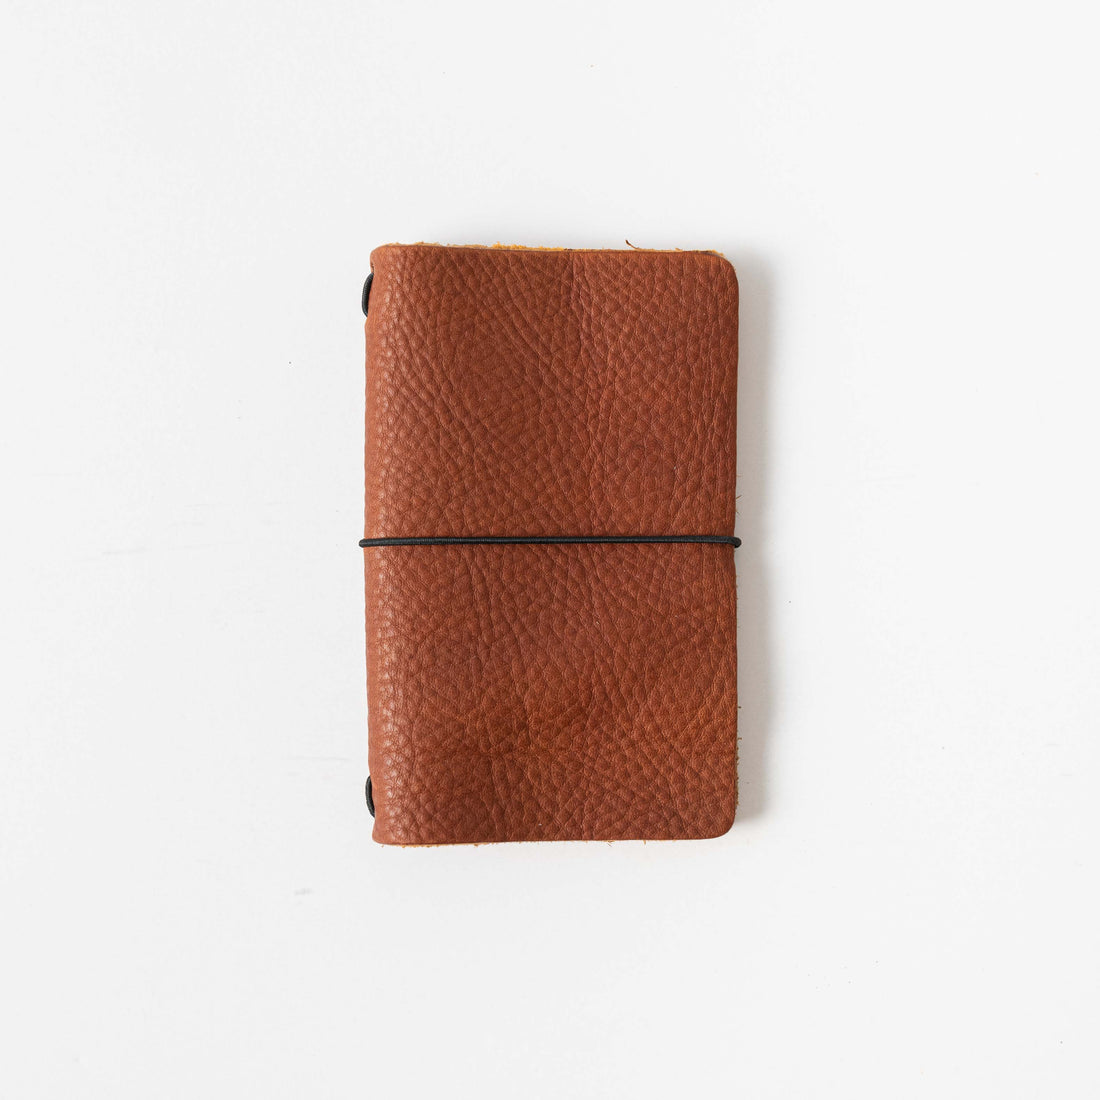 Macchiato Travel Notebook- leather journal - leather notebook - KMM &amp; Co.